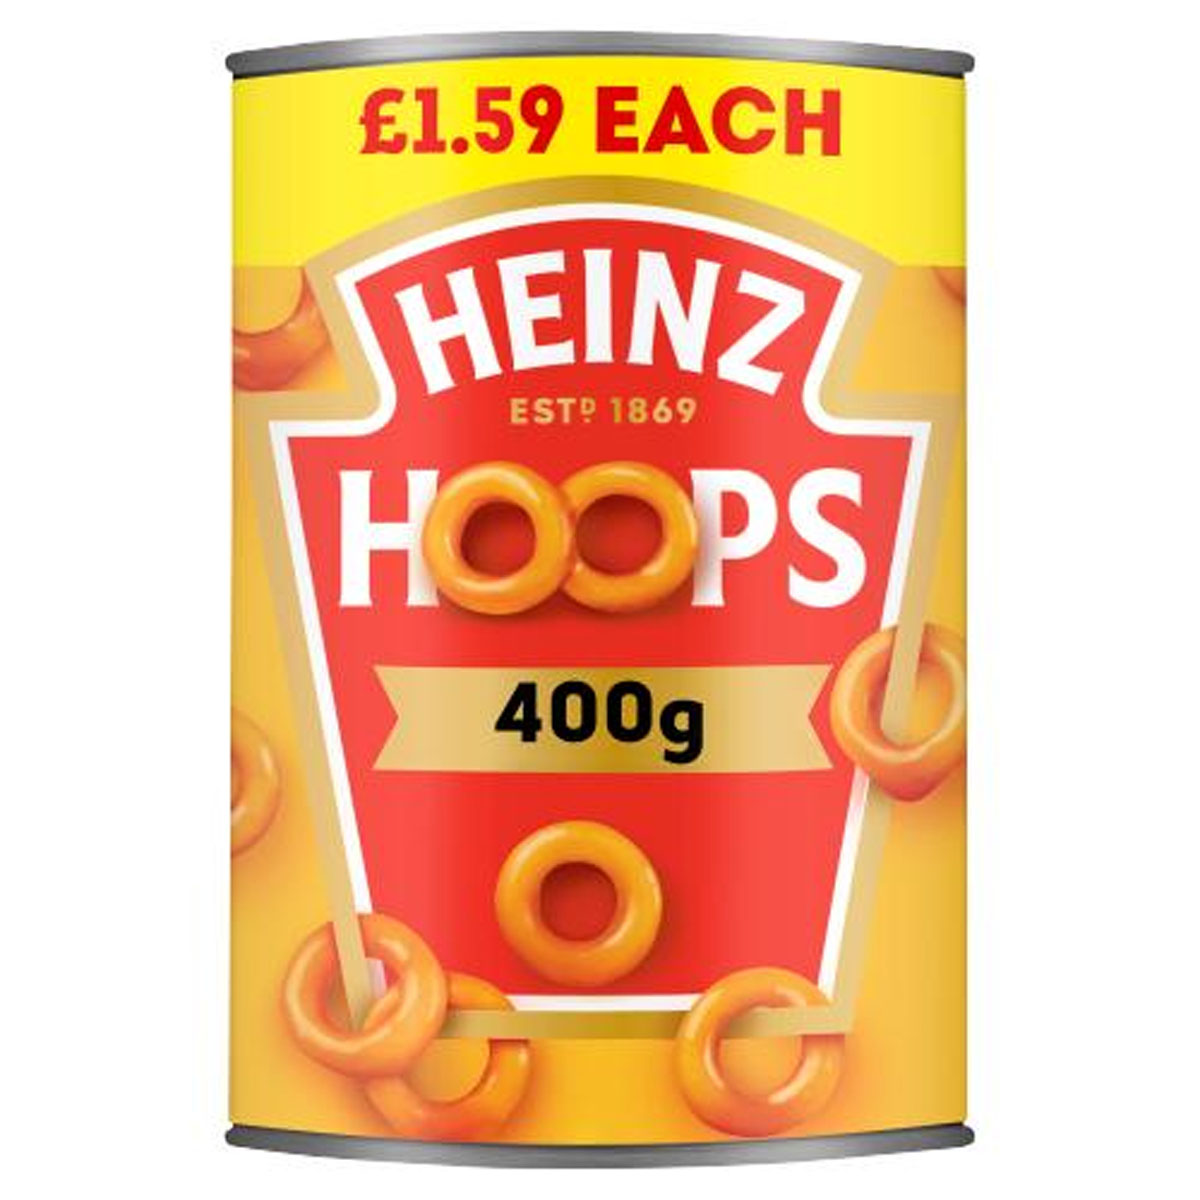 Heinz - Hoops Shaped Pasta in a Juicy Tomato Sauce - 400g tin.